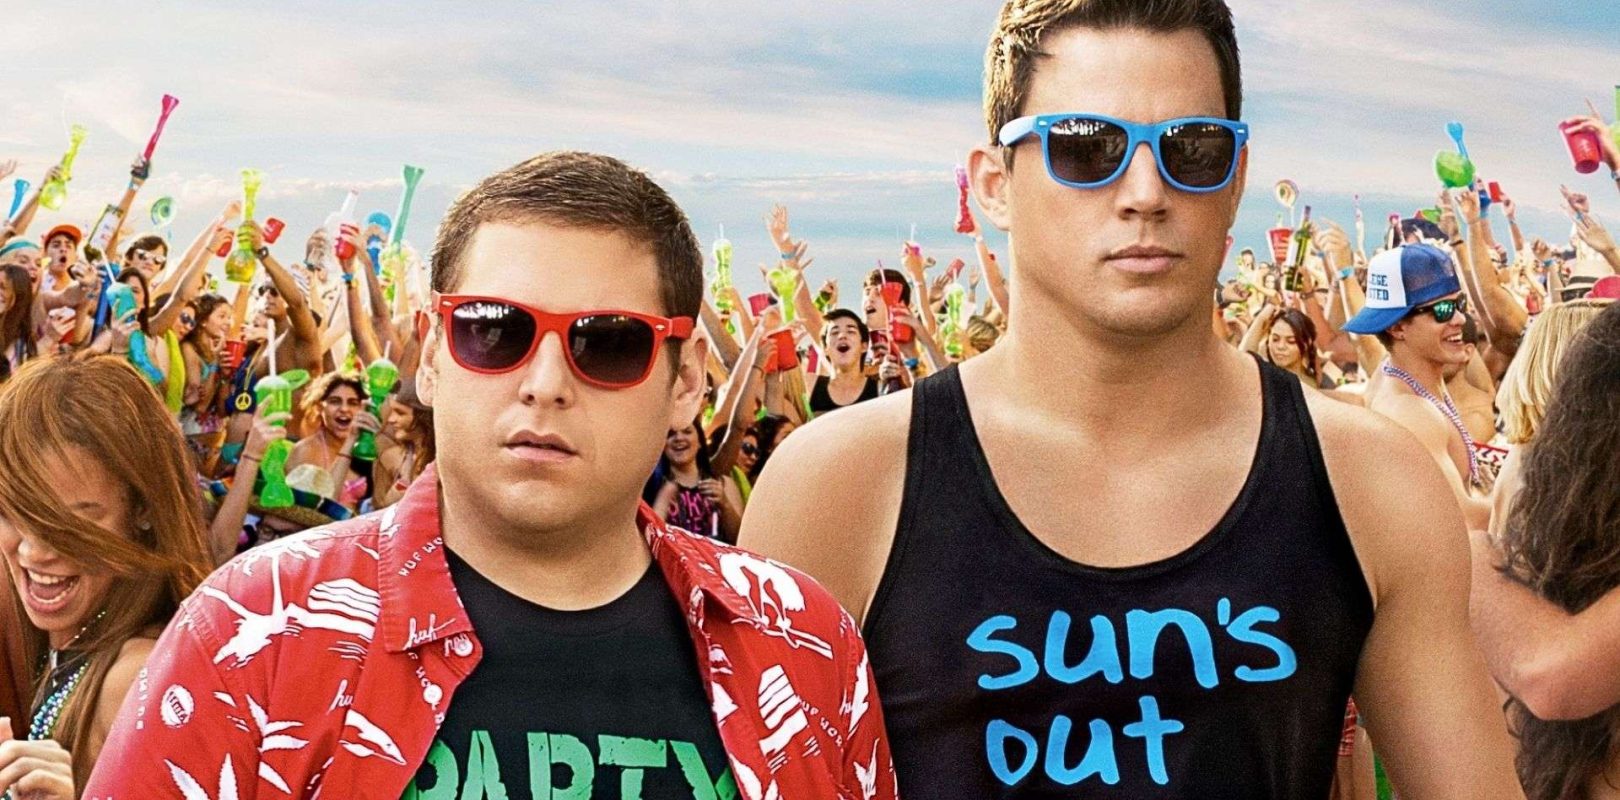 41-facts-about-the-movie-22-jump-street